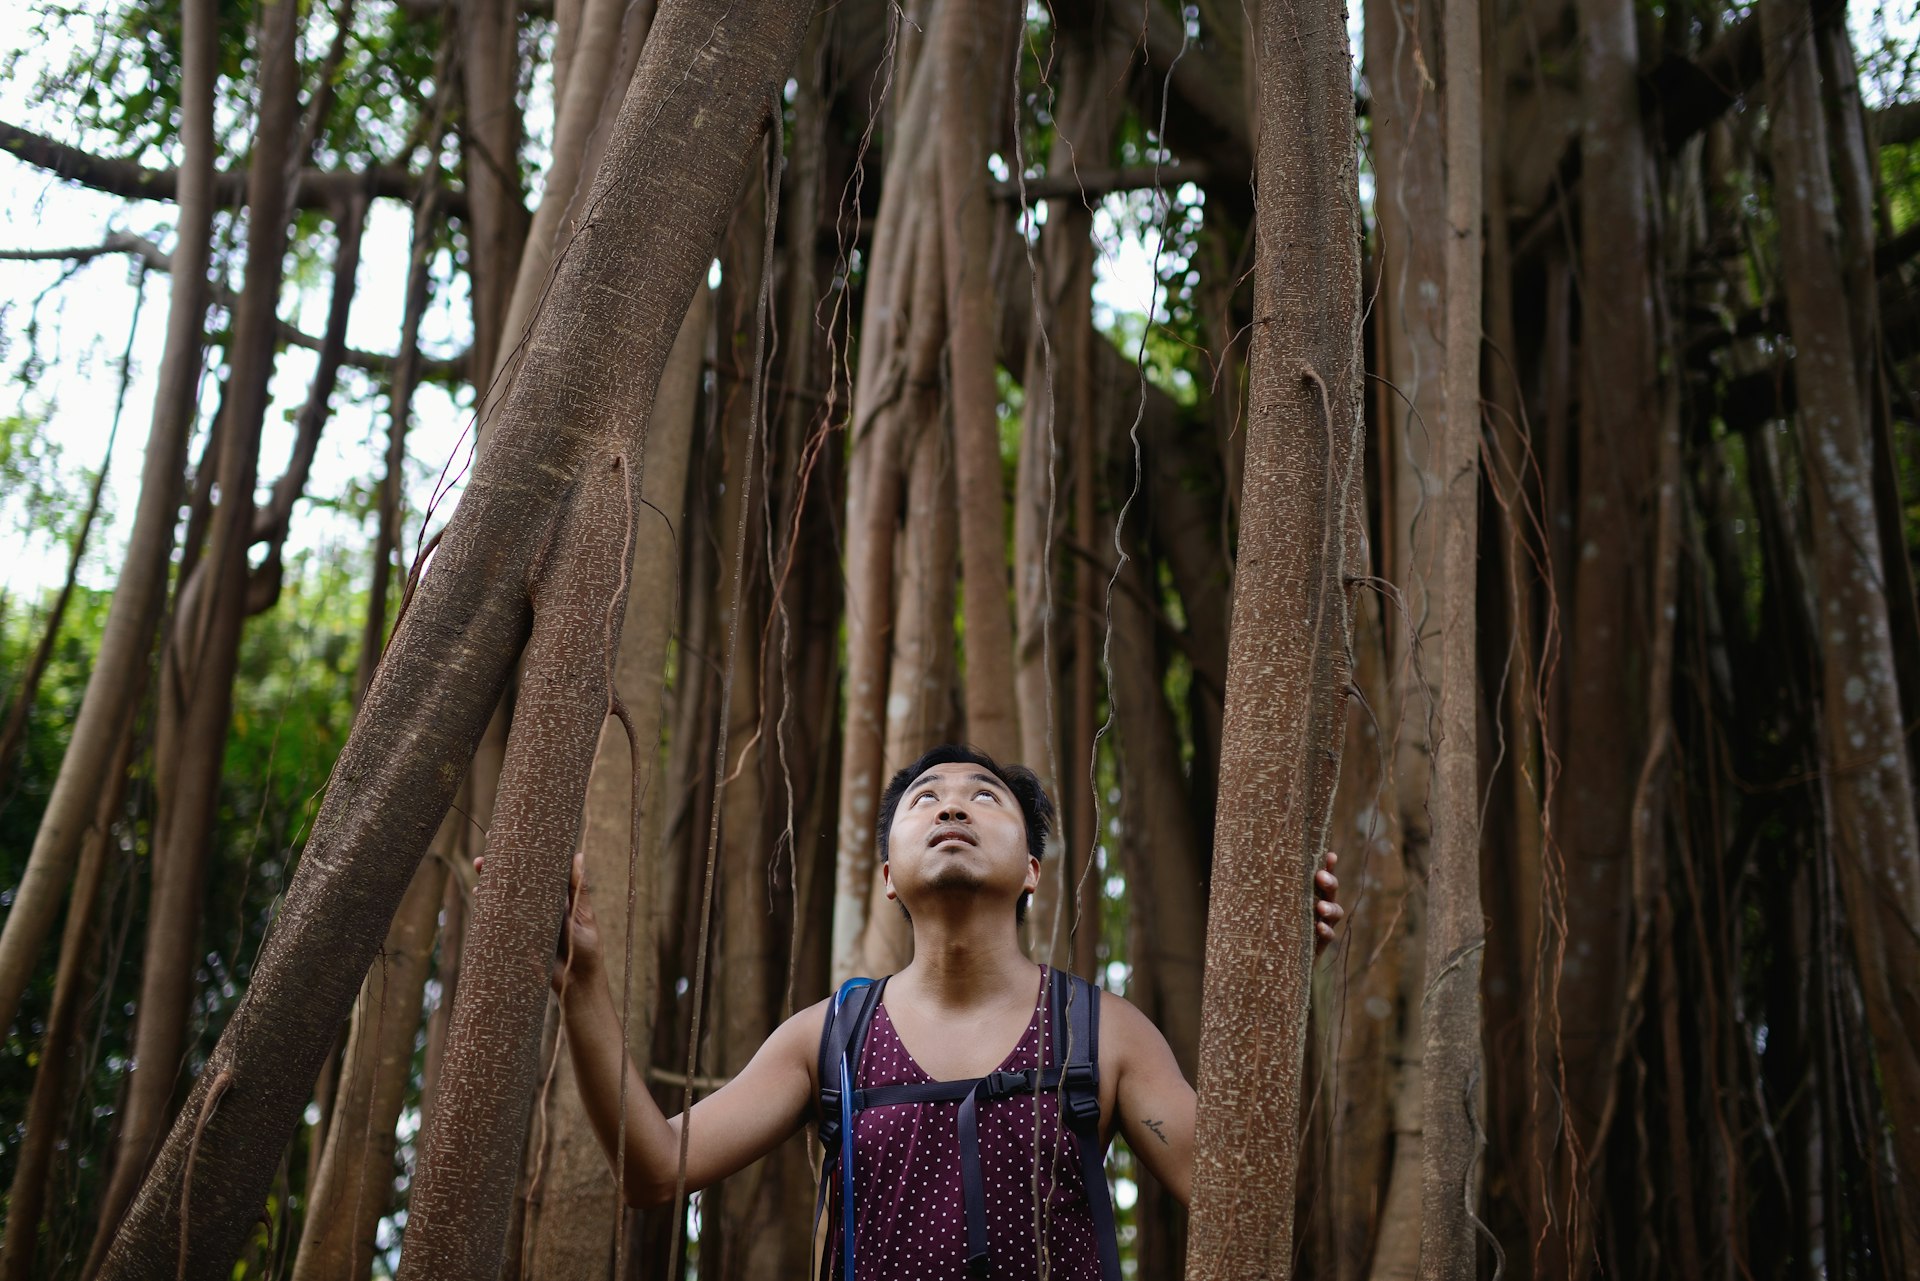 A man looks up at the roots of a rubber tree in Pulau Ubin